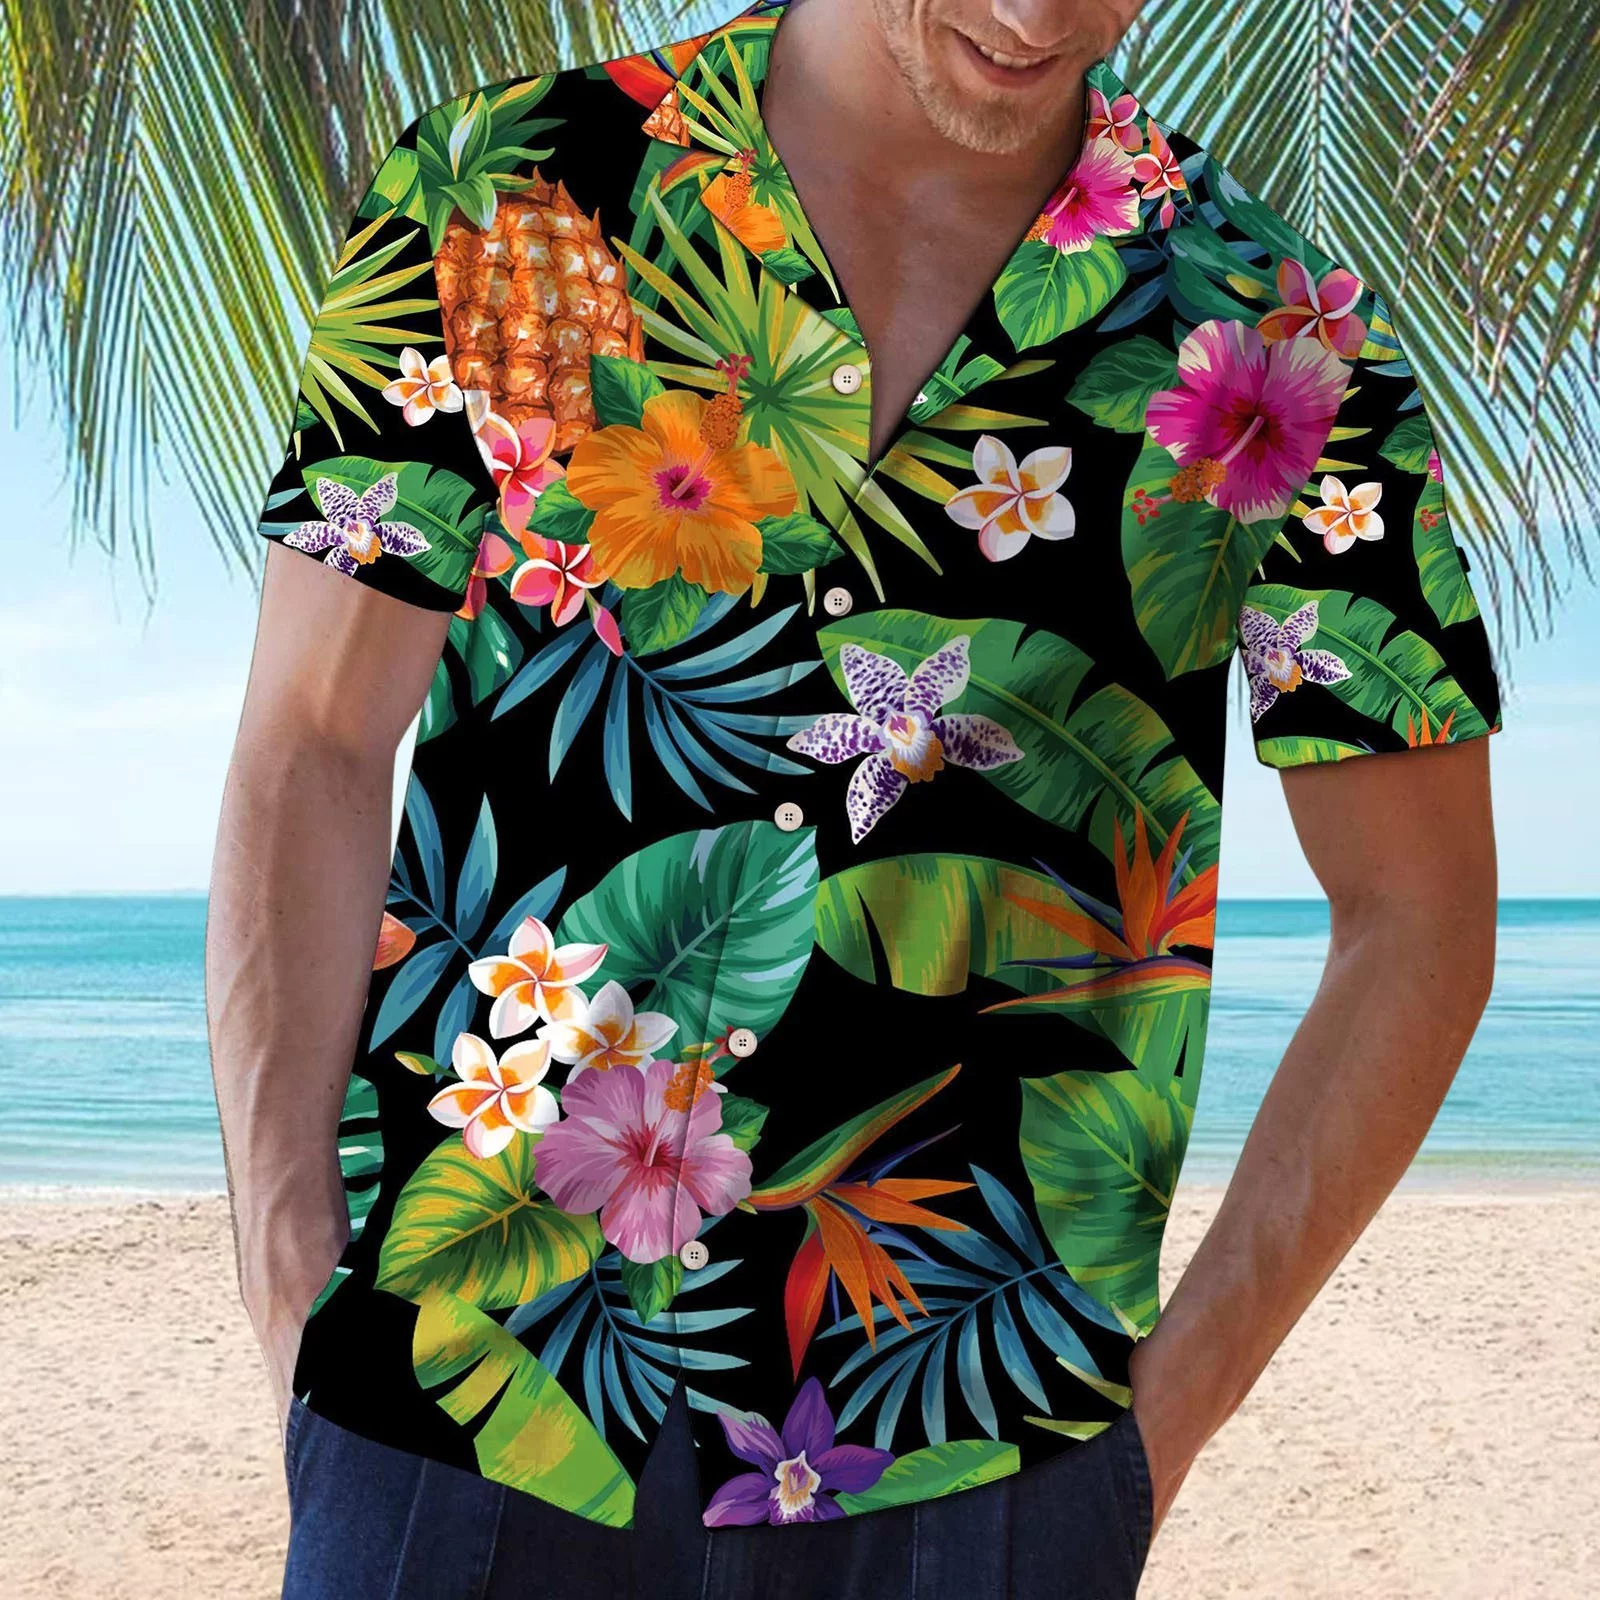 Men's hawaiian shirts, also known as aloha shirts, are iconic pieces of clothing that exude a laid-back and tropical vibe.